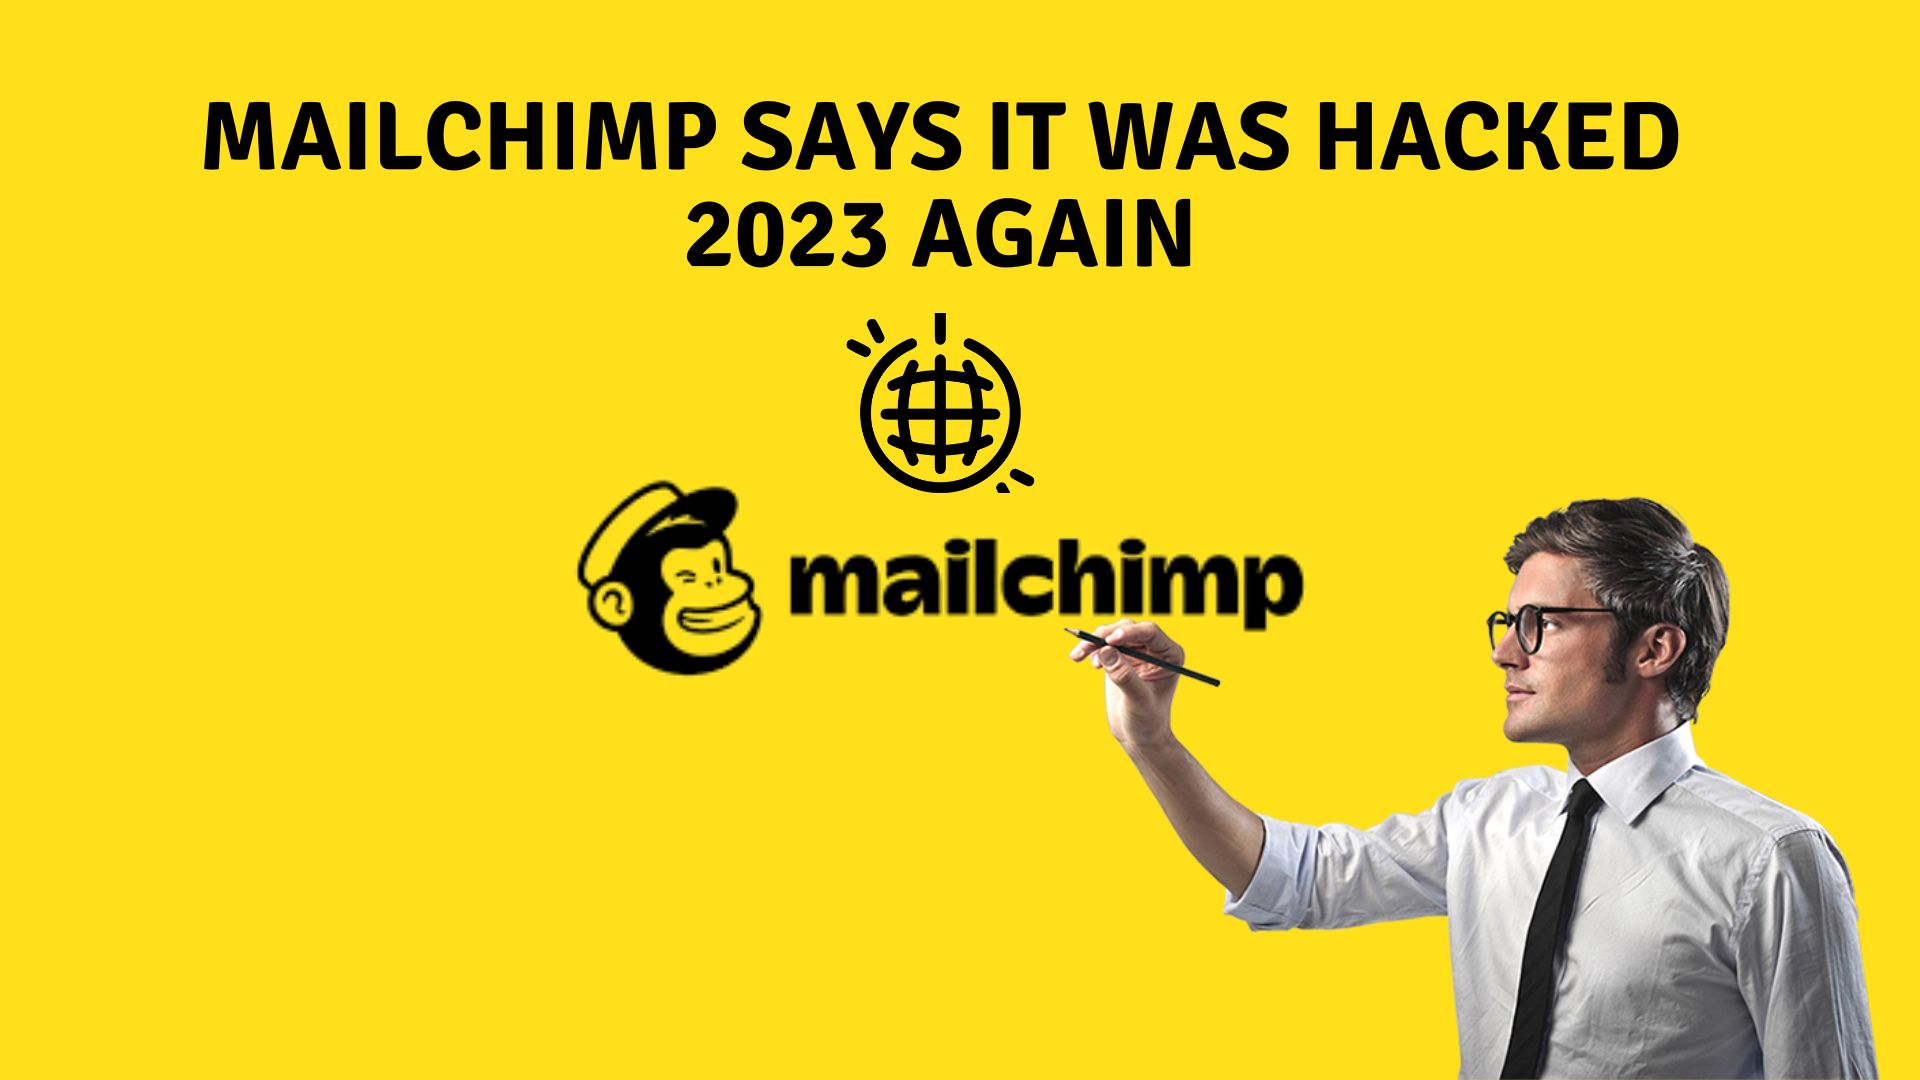 Mailchimp says it was hacked 2023 again